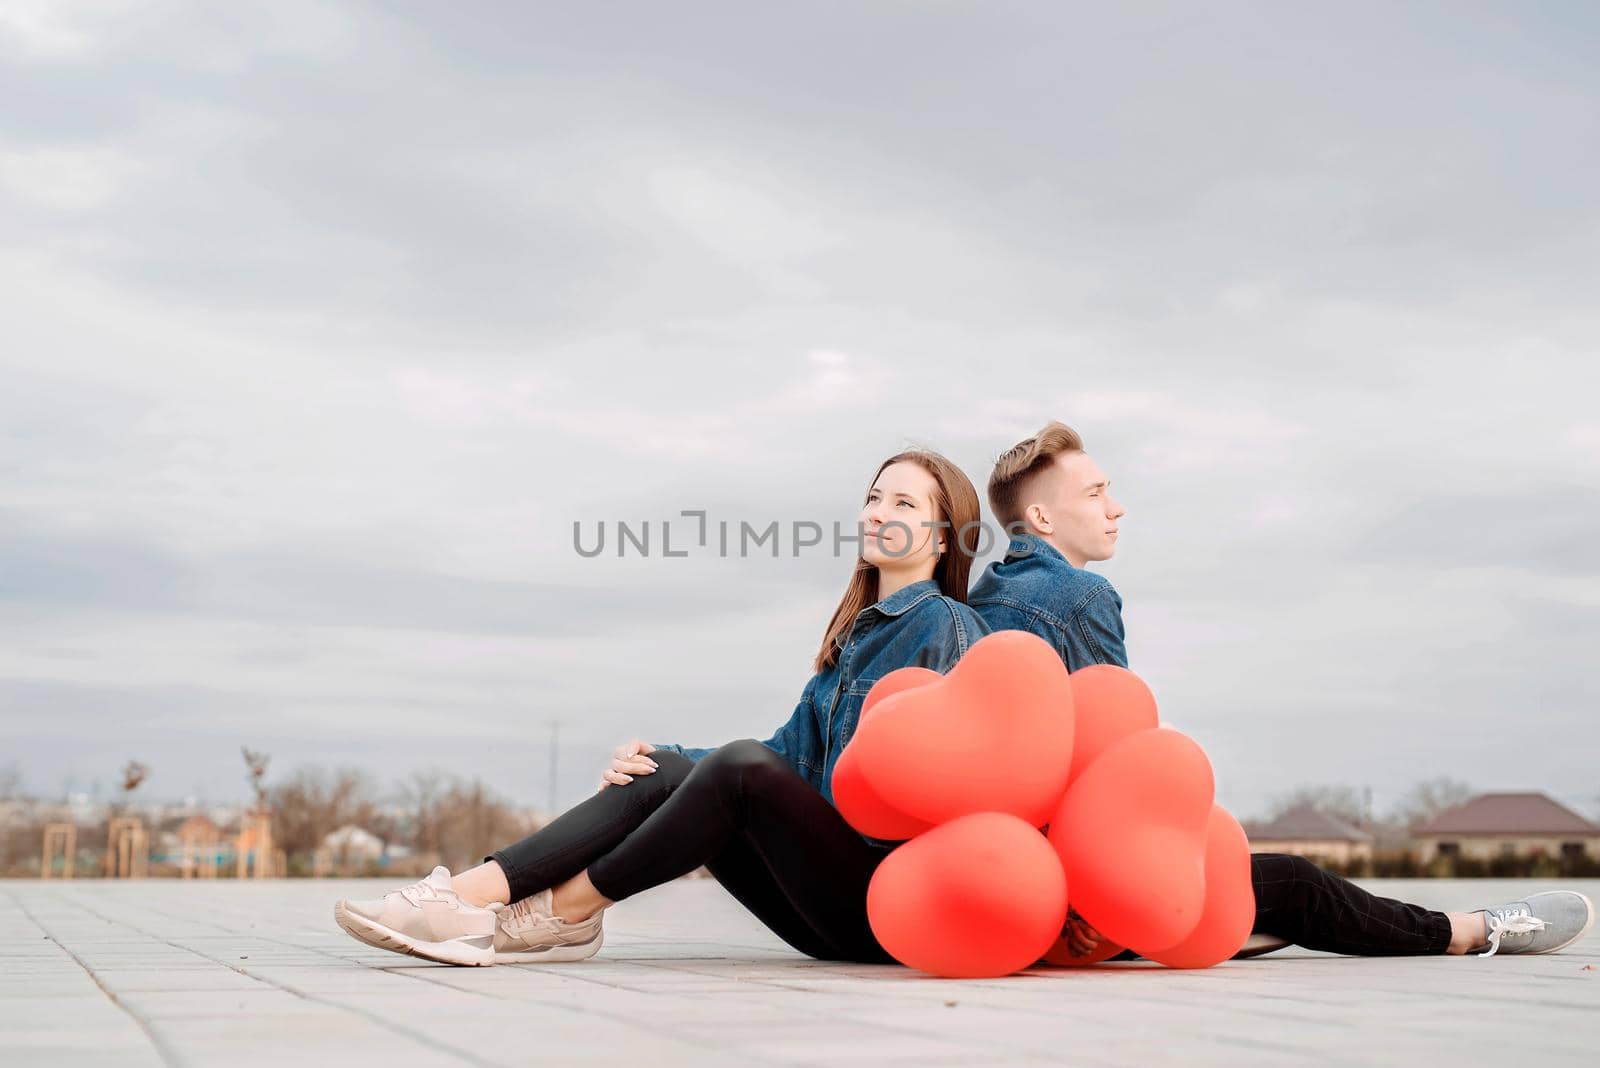 Young loving smiling couple sitting back to back in the street holding a pile of red balloons spending time together